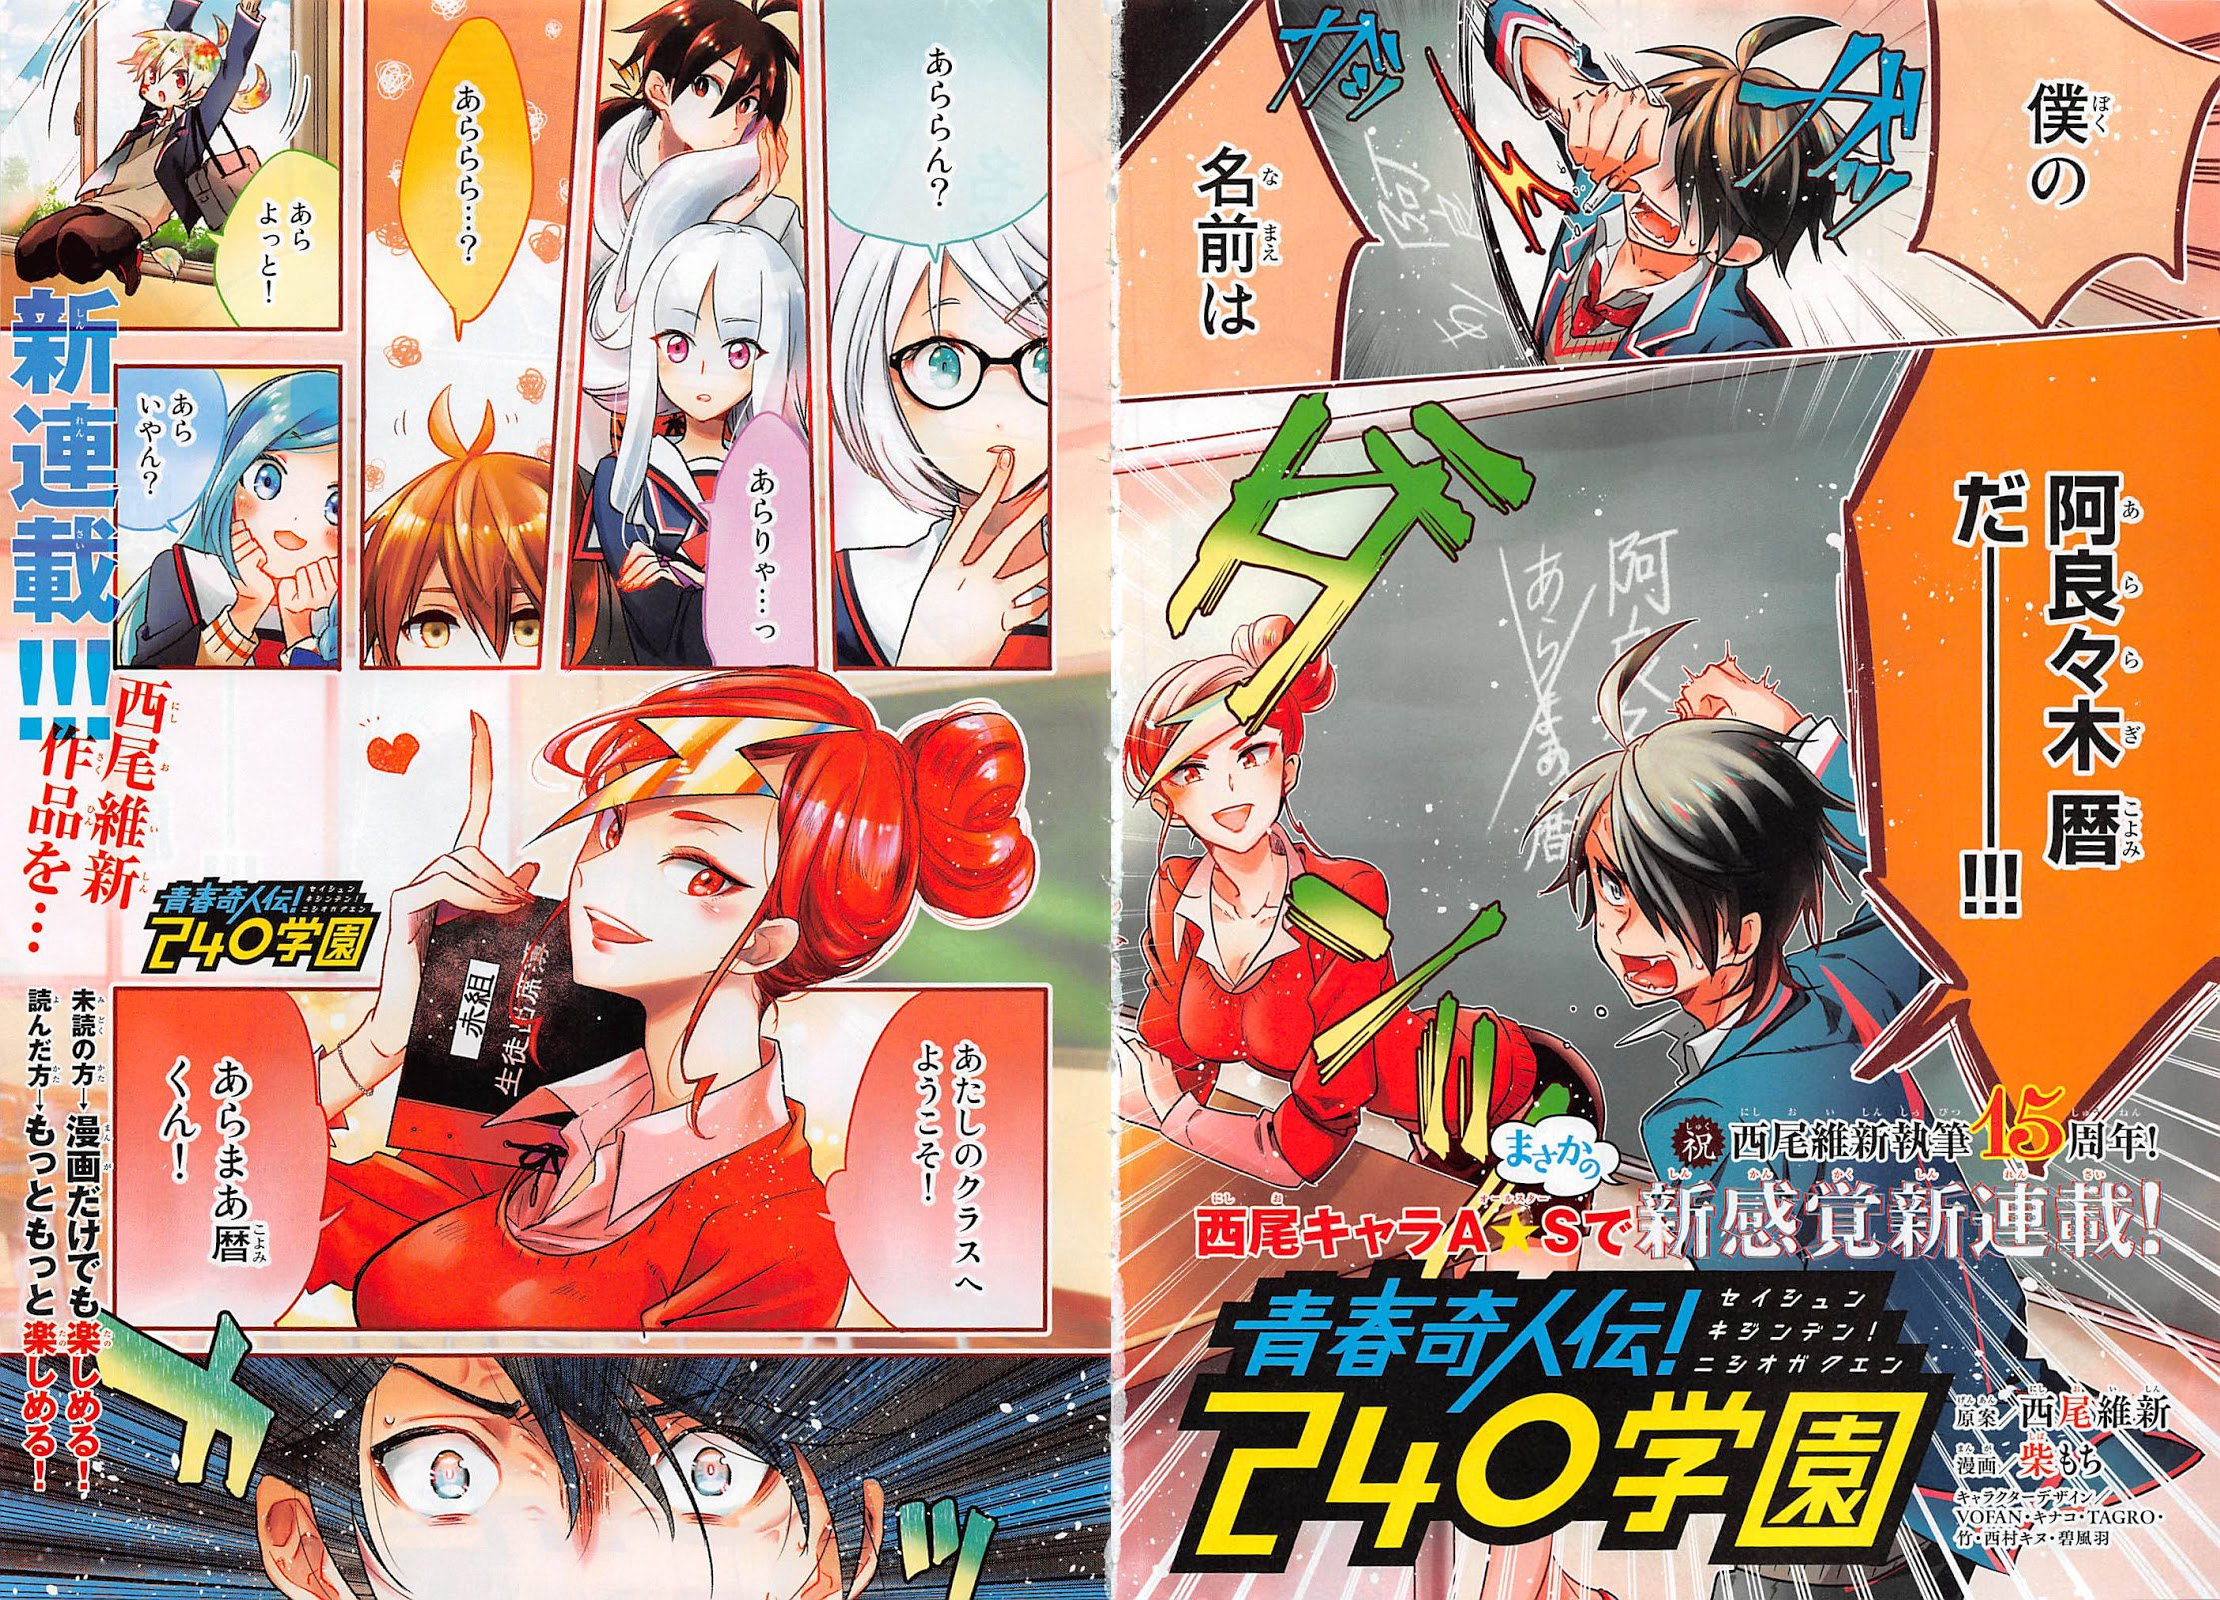 Legend of Eccentric Youth! 240 Academy Chapter 1 | NISIOISIN Wiki 